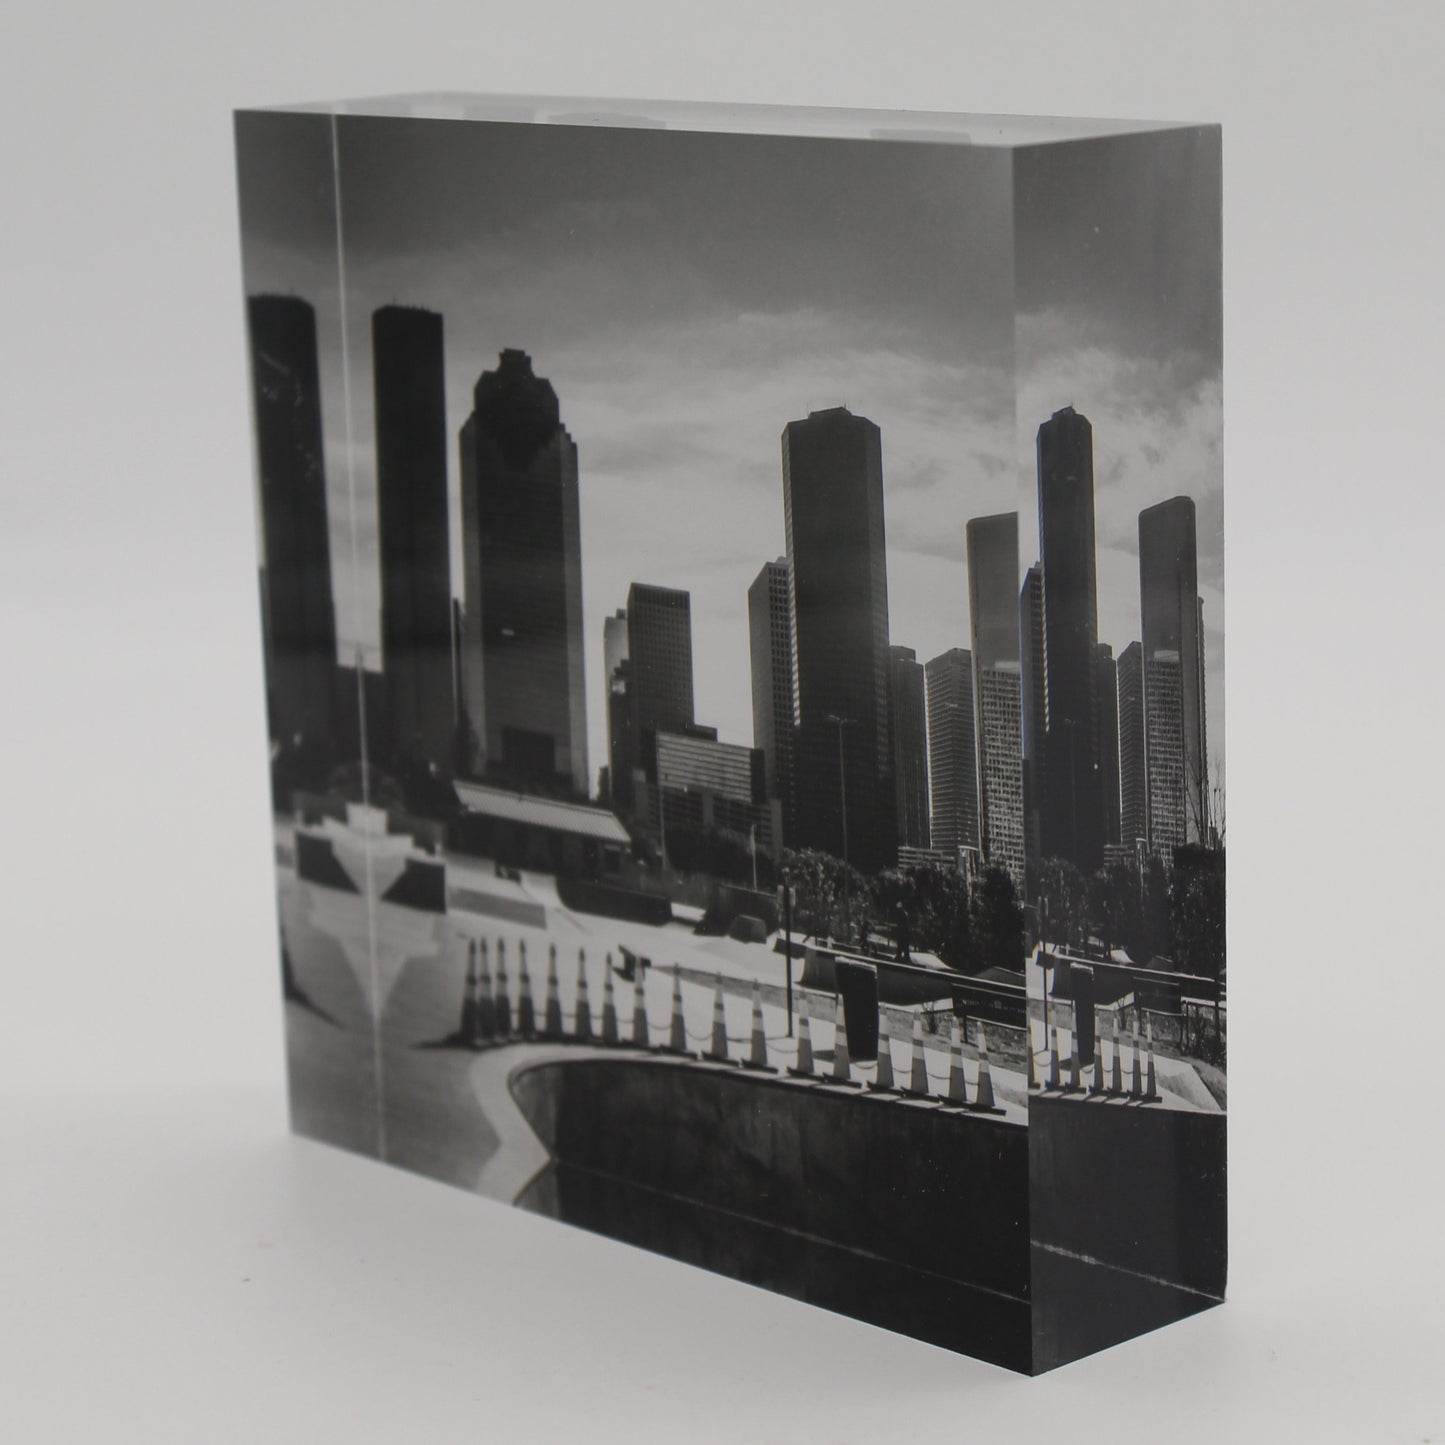 Tilted view of Acrylic block depicting black and white photo of Houston skyline